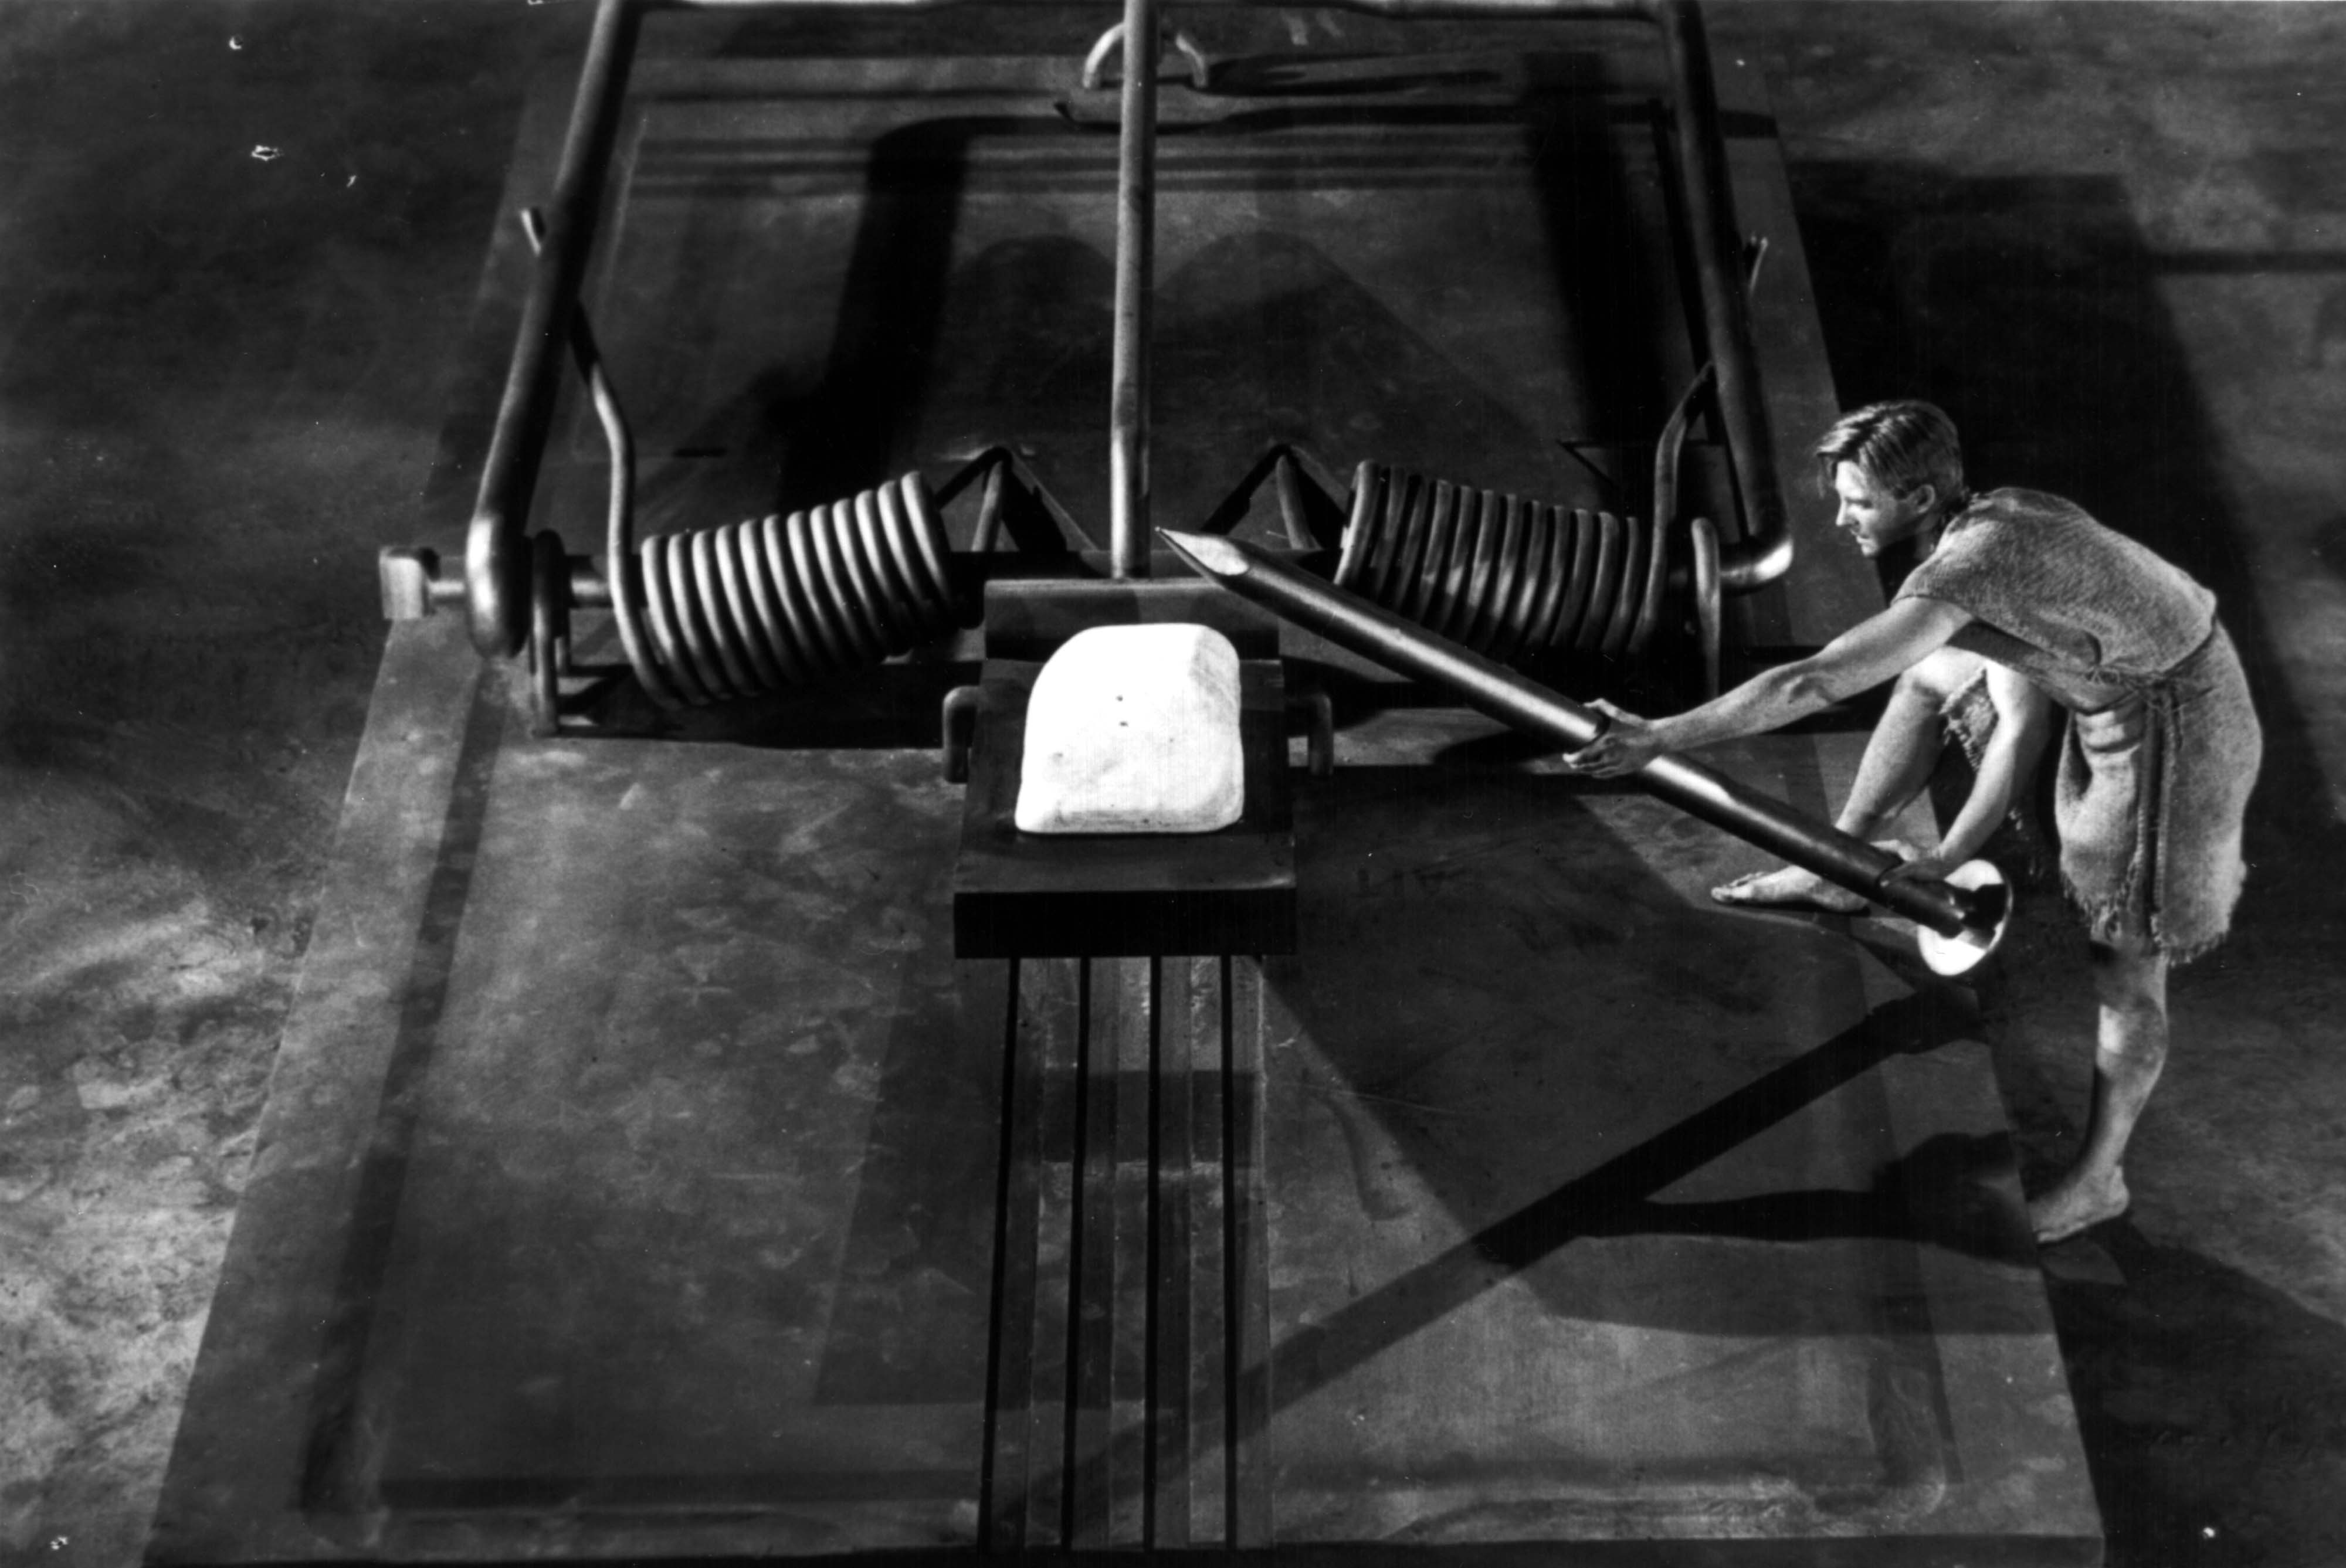 49. The Incredible Shrinking Man